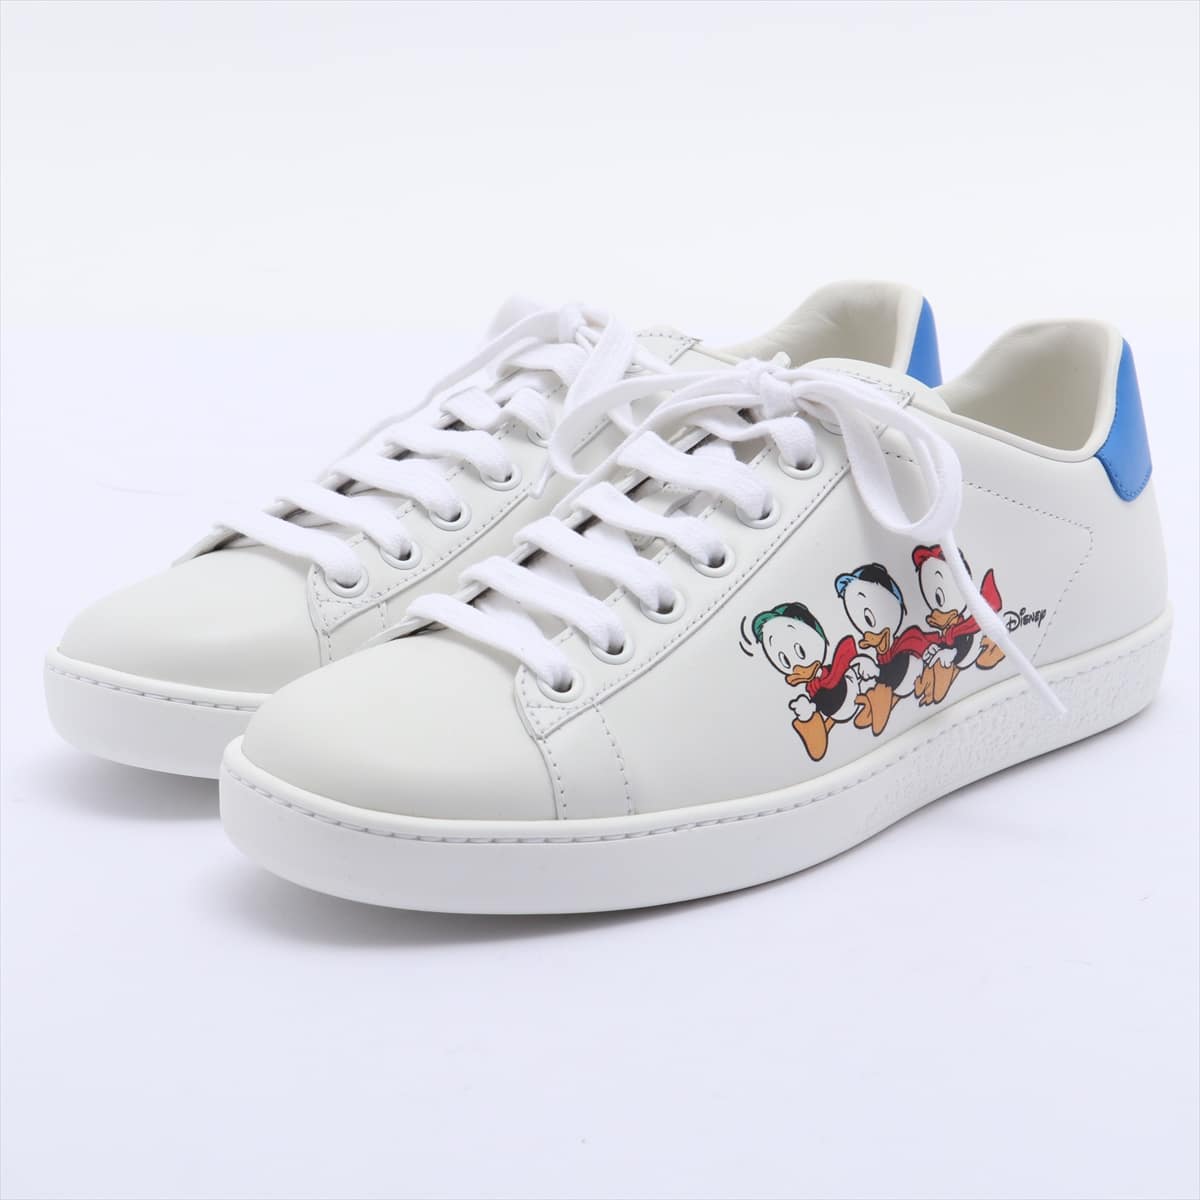 Gucci x Disney ACE Leather Sneakers 36 Ladies' White Huey, Dewey, and Louie Print 649400